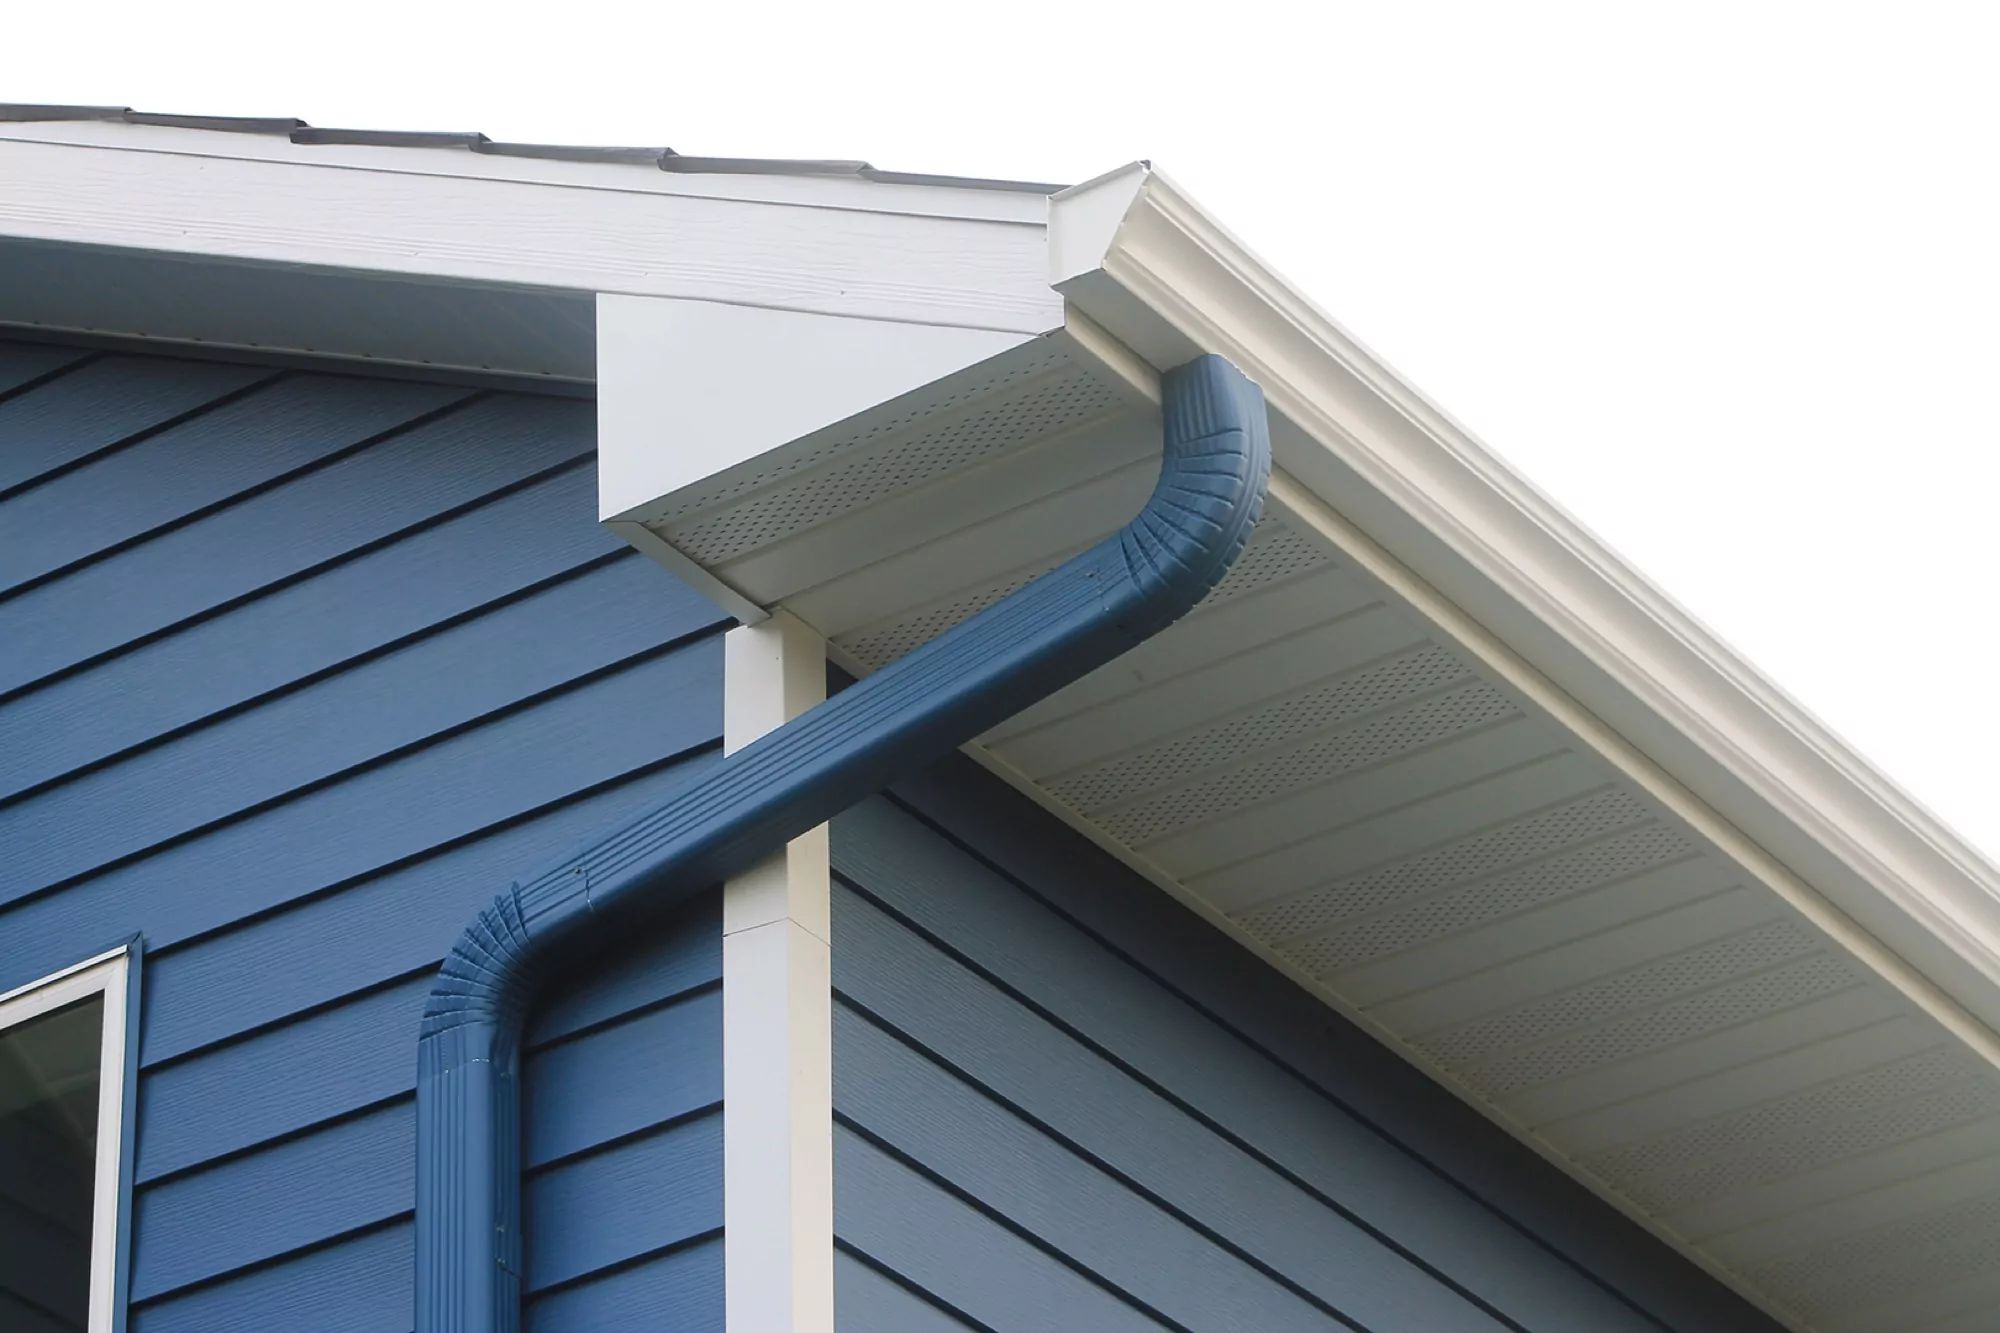 White and blue gutters on a blue home